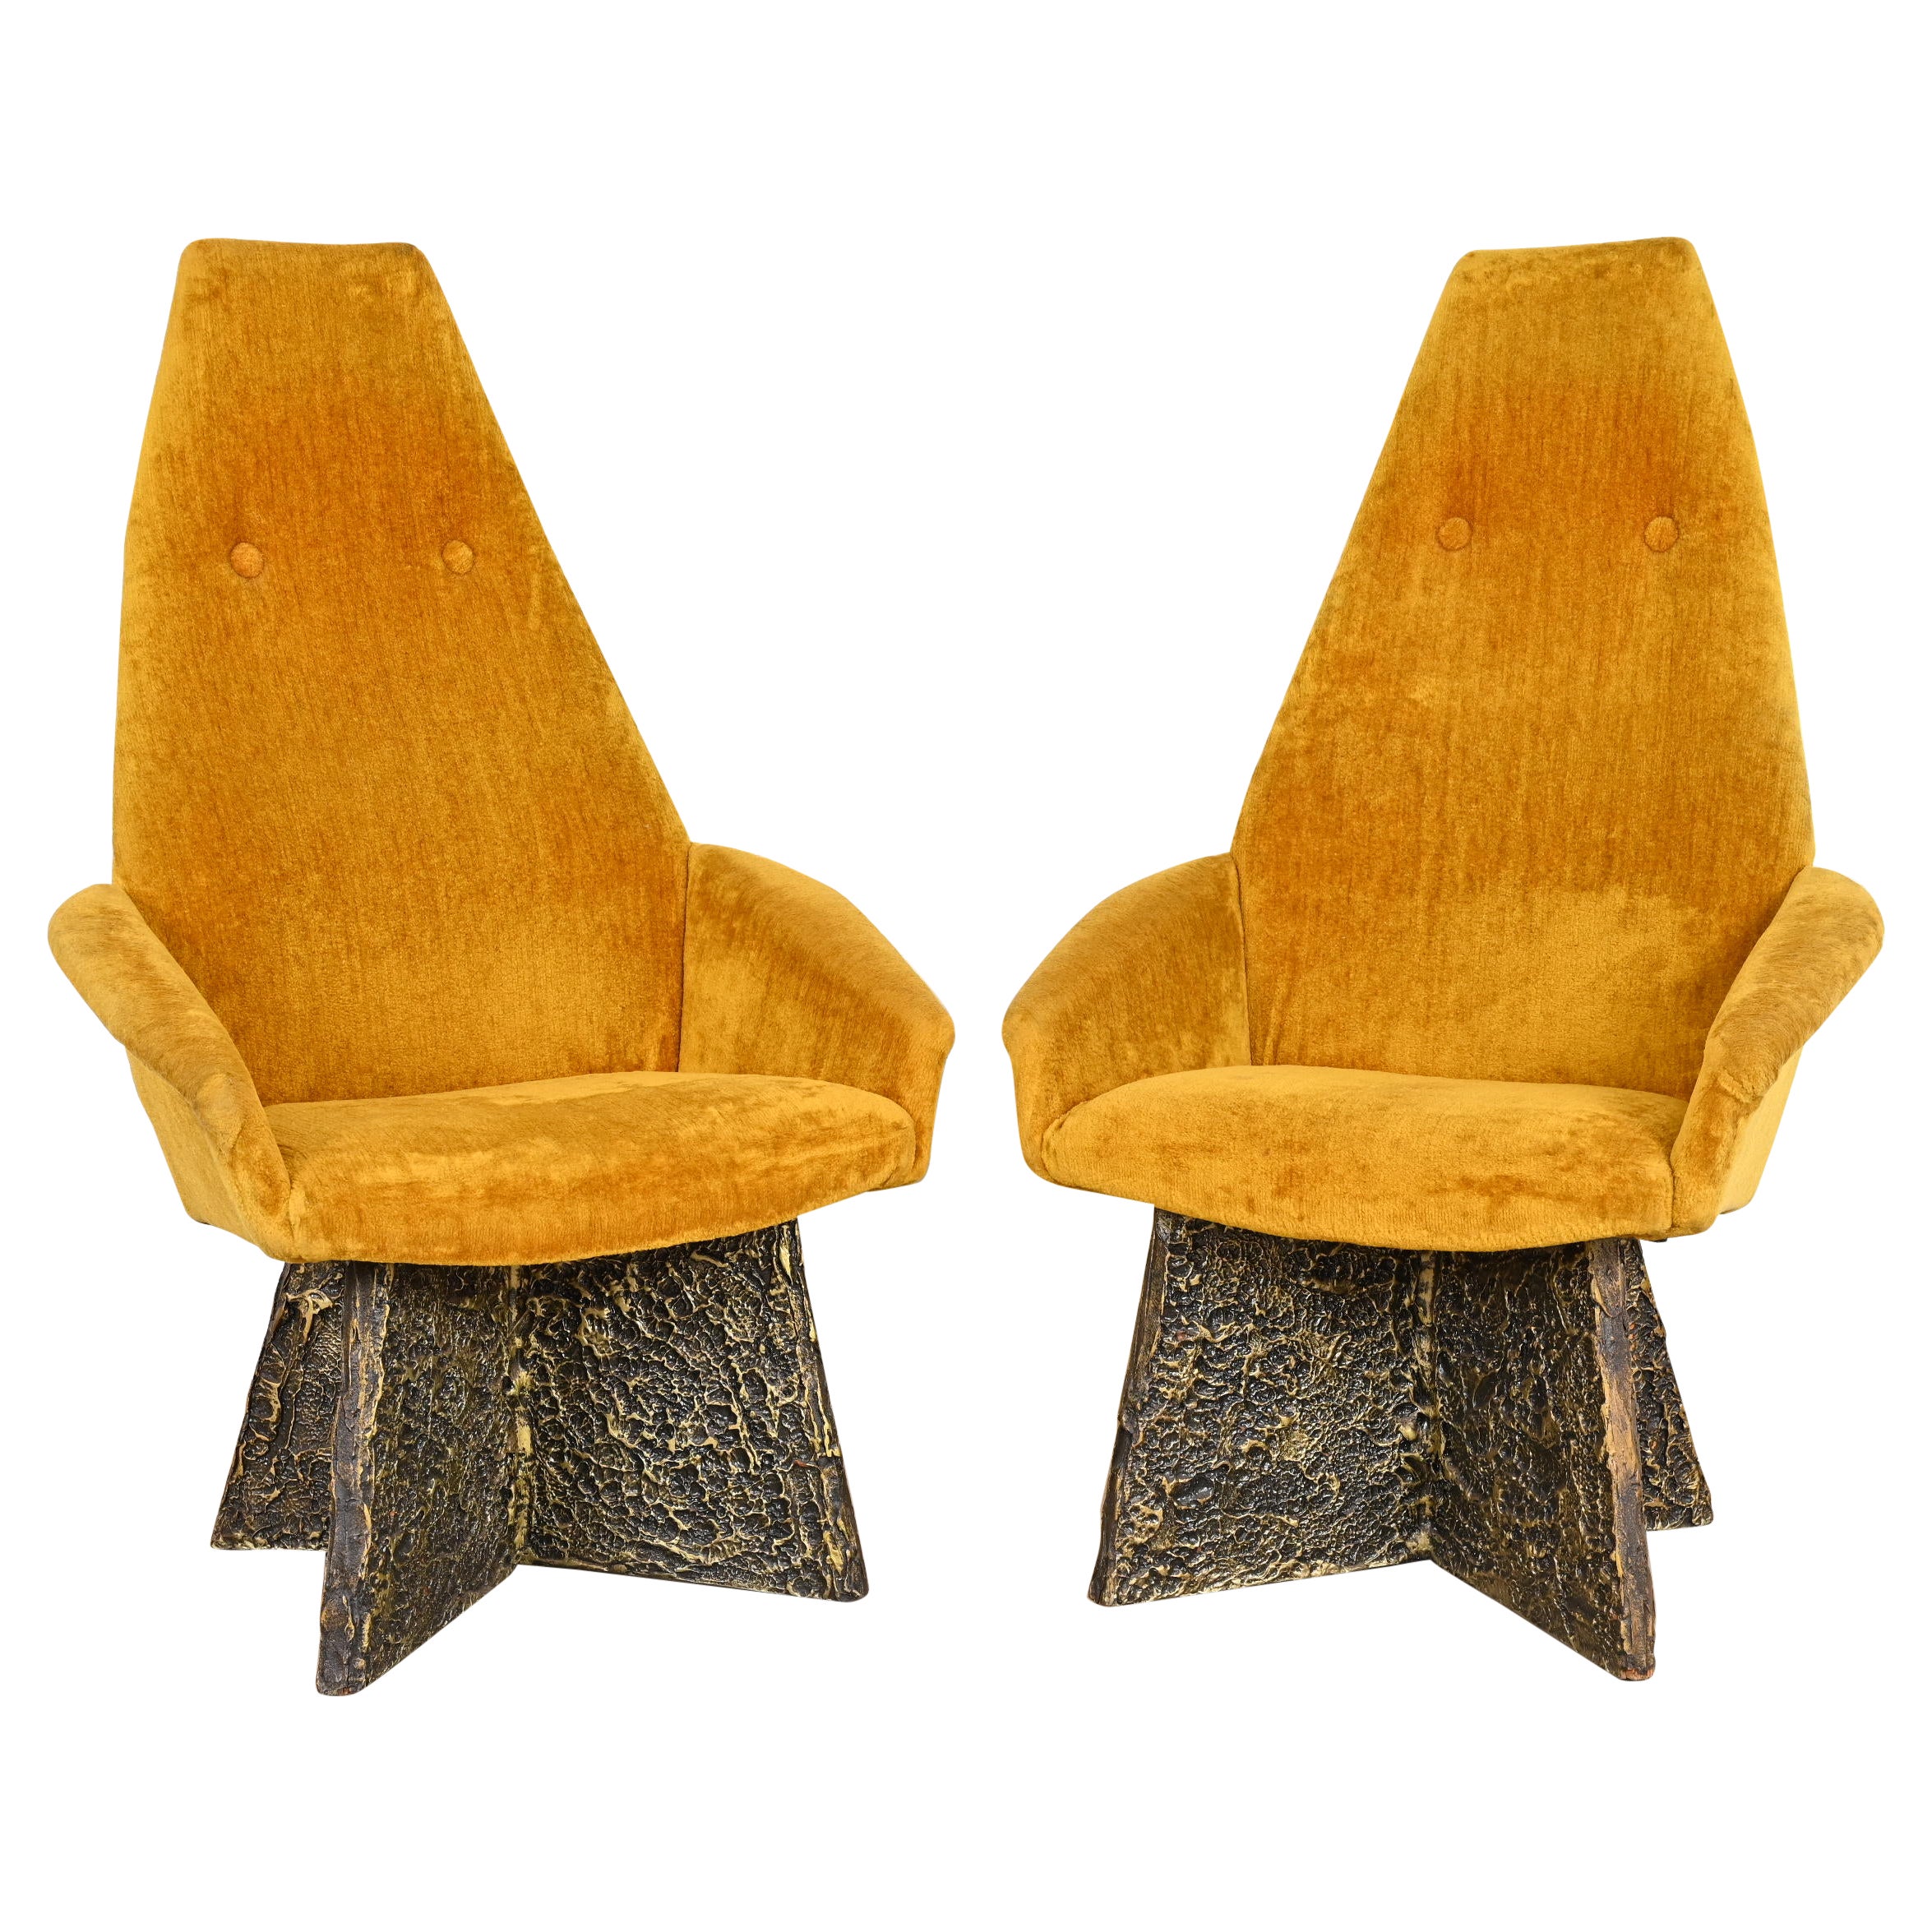 Adrian Pearsall Mid-Century Modern Brutalist High Back Lounge Chairs, Pair